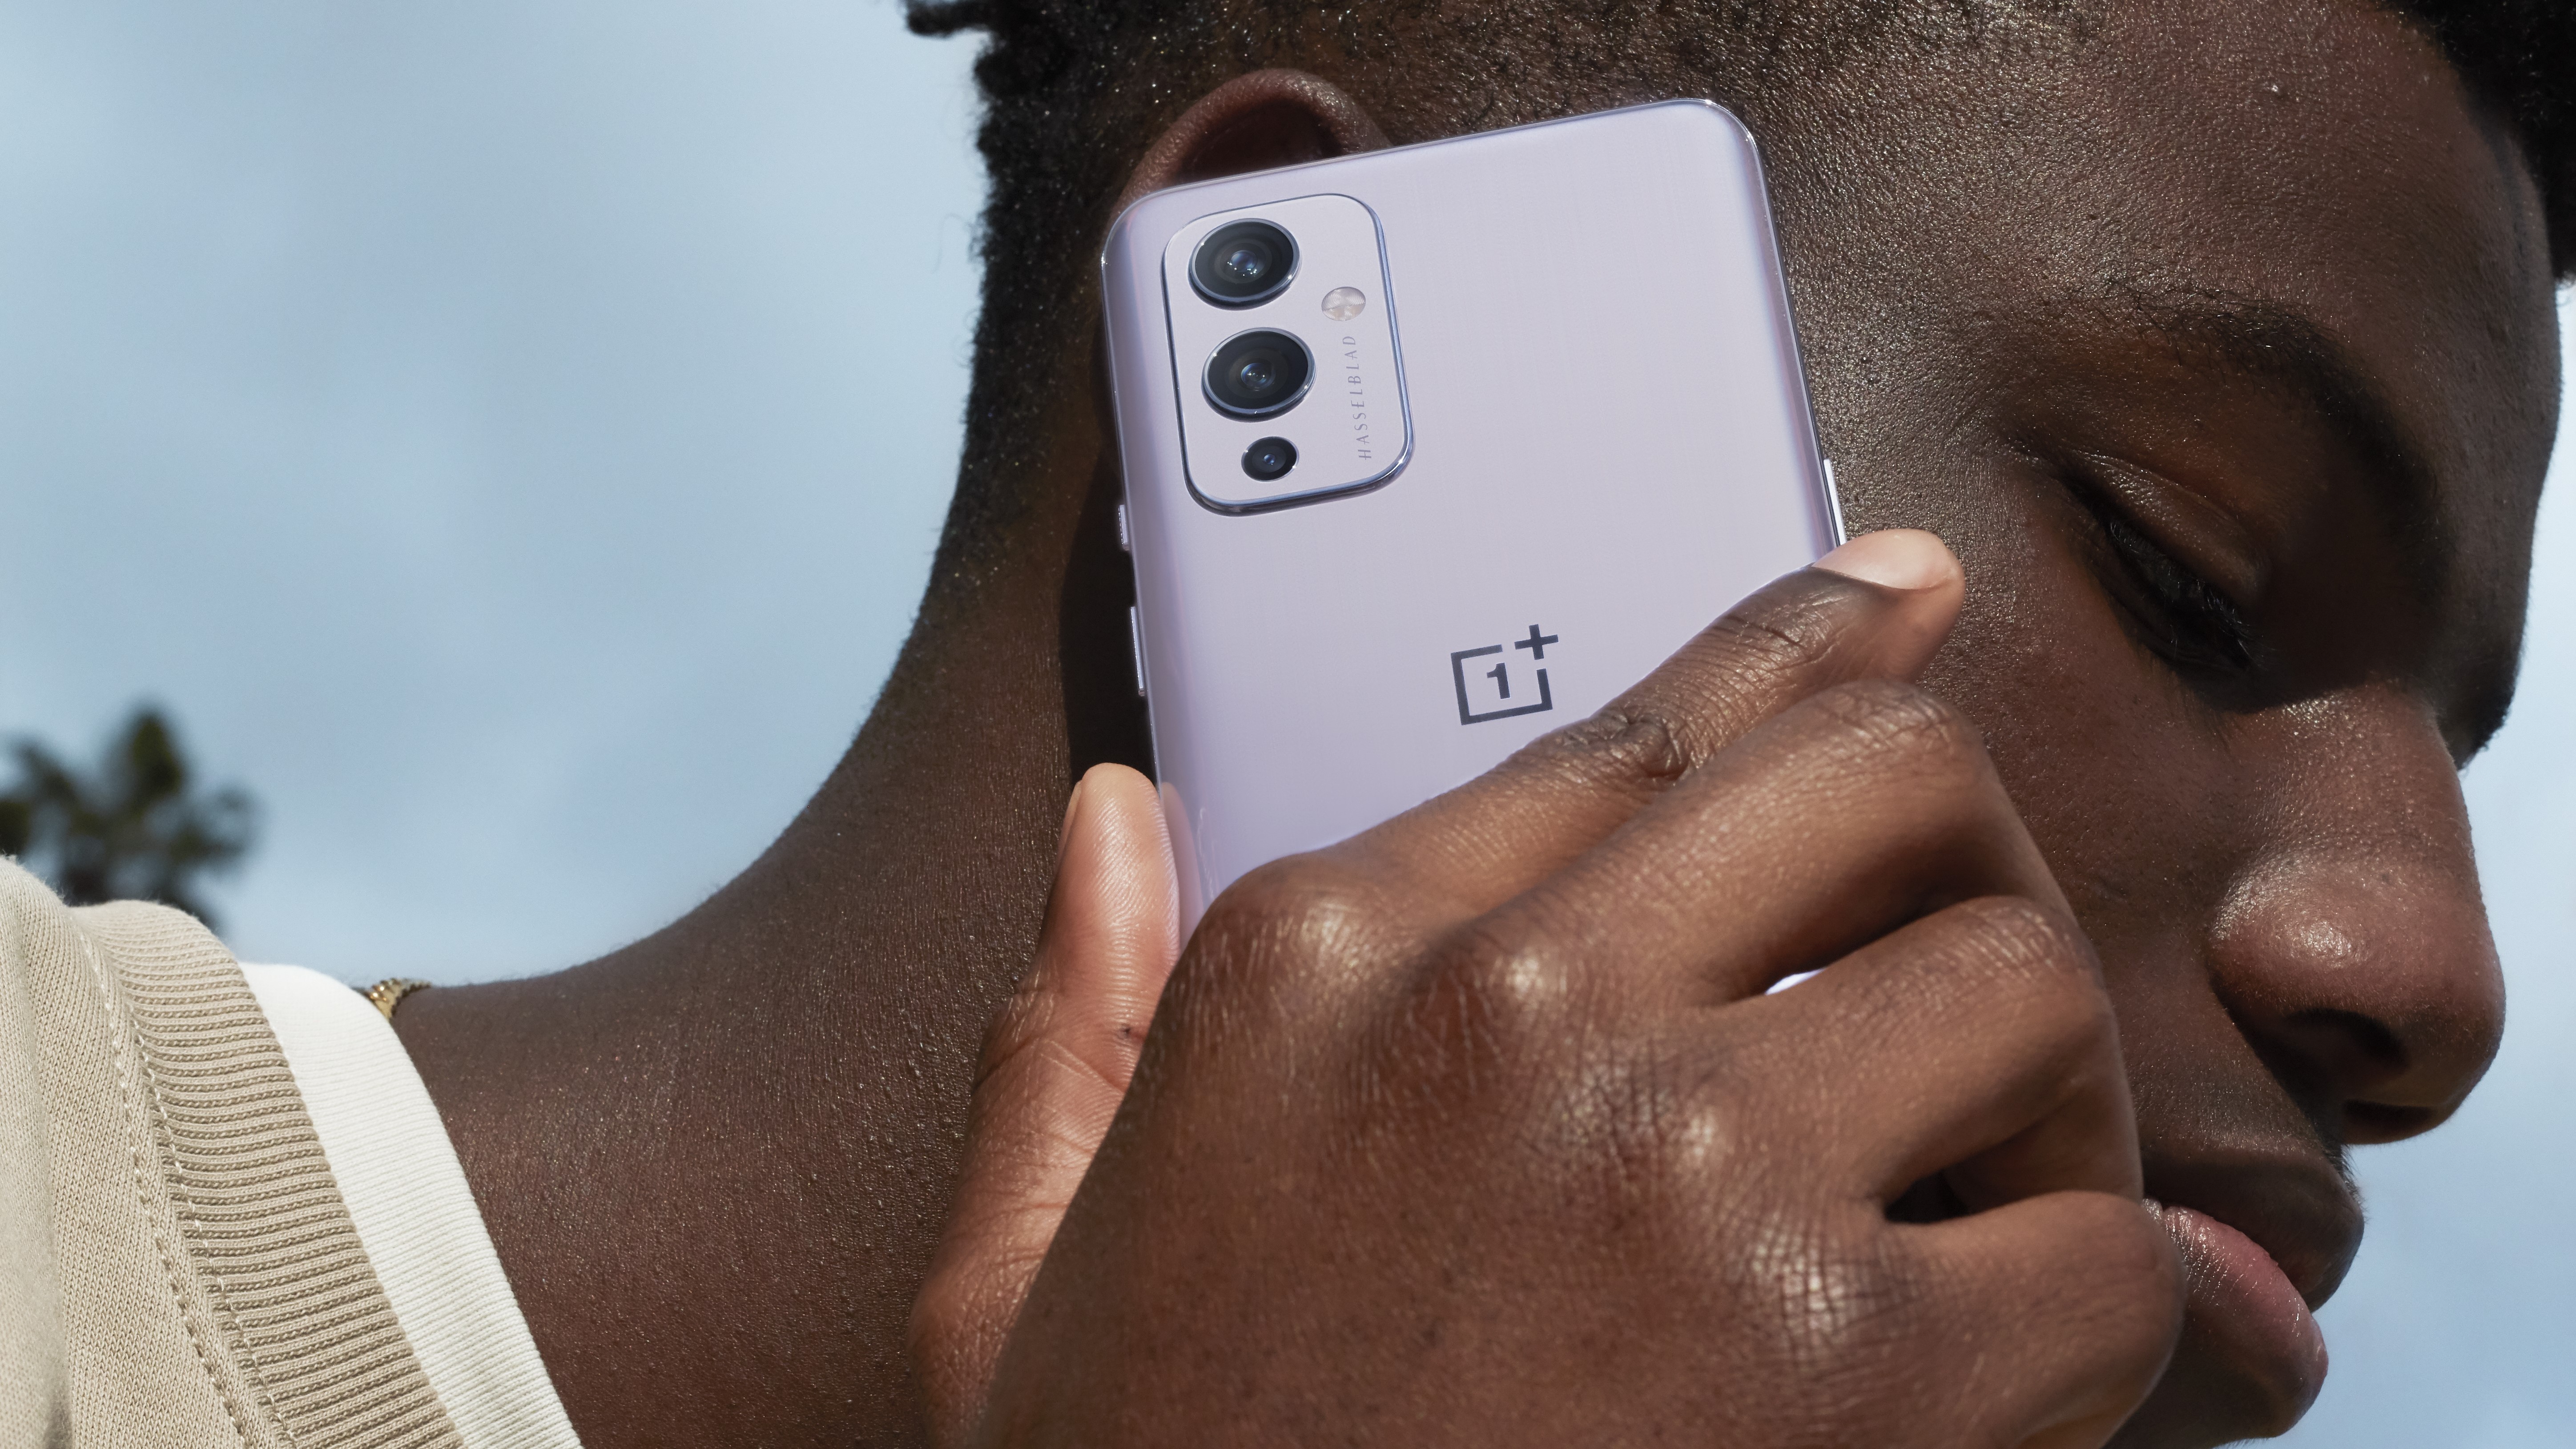 OnePlus 9 series pre-orders to begin on March 23 with free gifts; colour  variants revealed including an exclusive black option for the OnePlus 9 Pro  -  News